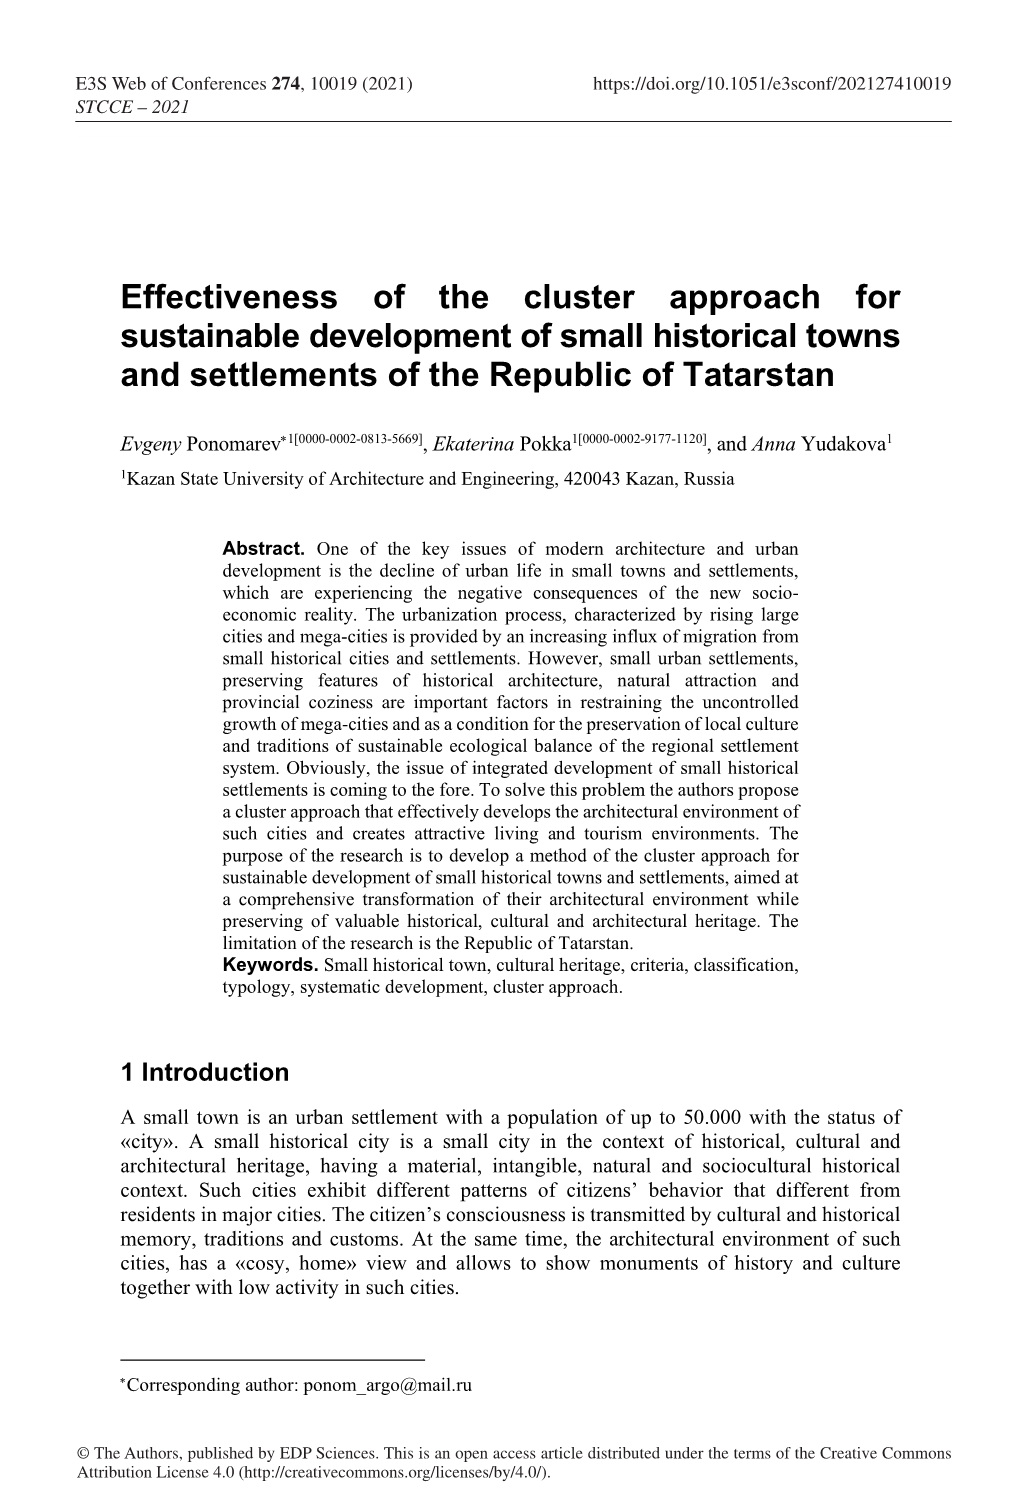 Effectiveness of the Cluster Approach for Sustainable Development of Small Historical Towns and Settlements of the Republic of Tatarstan